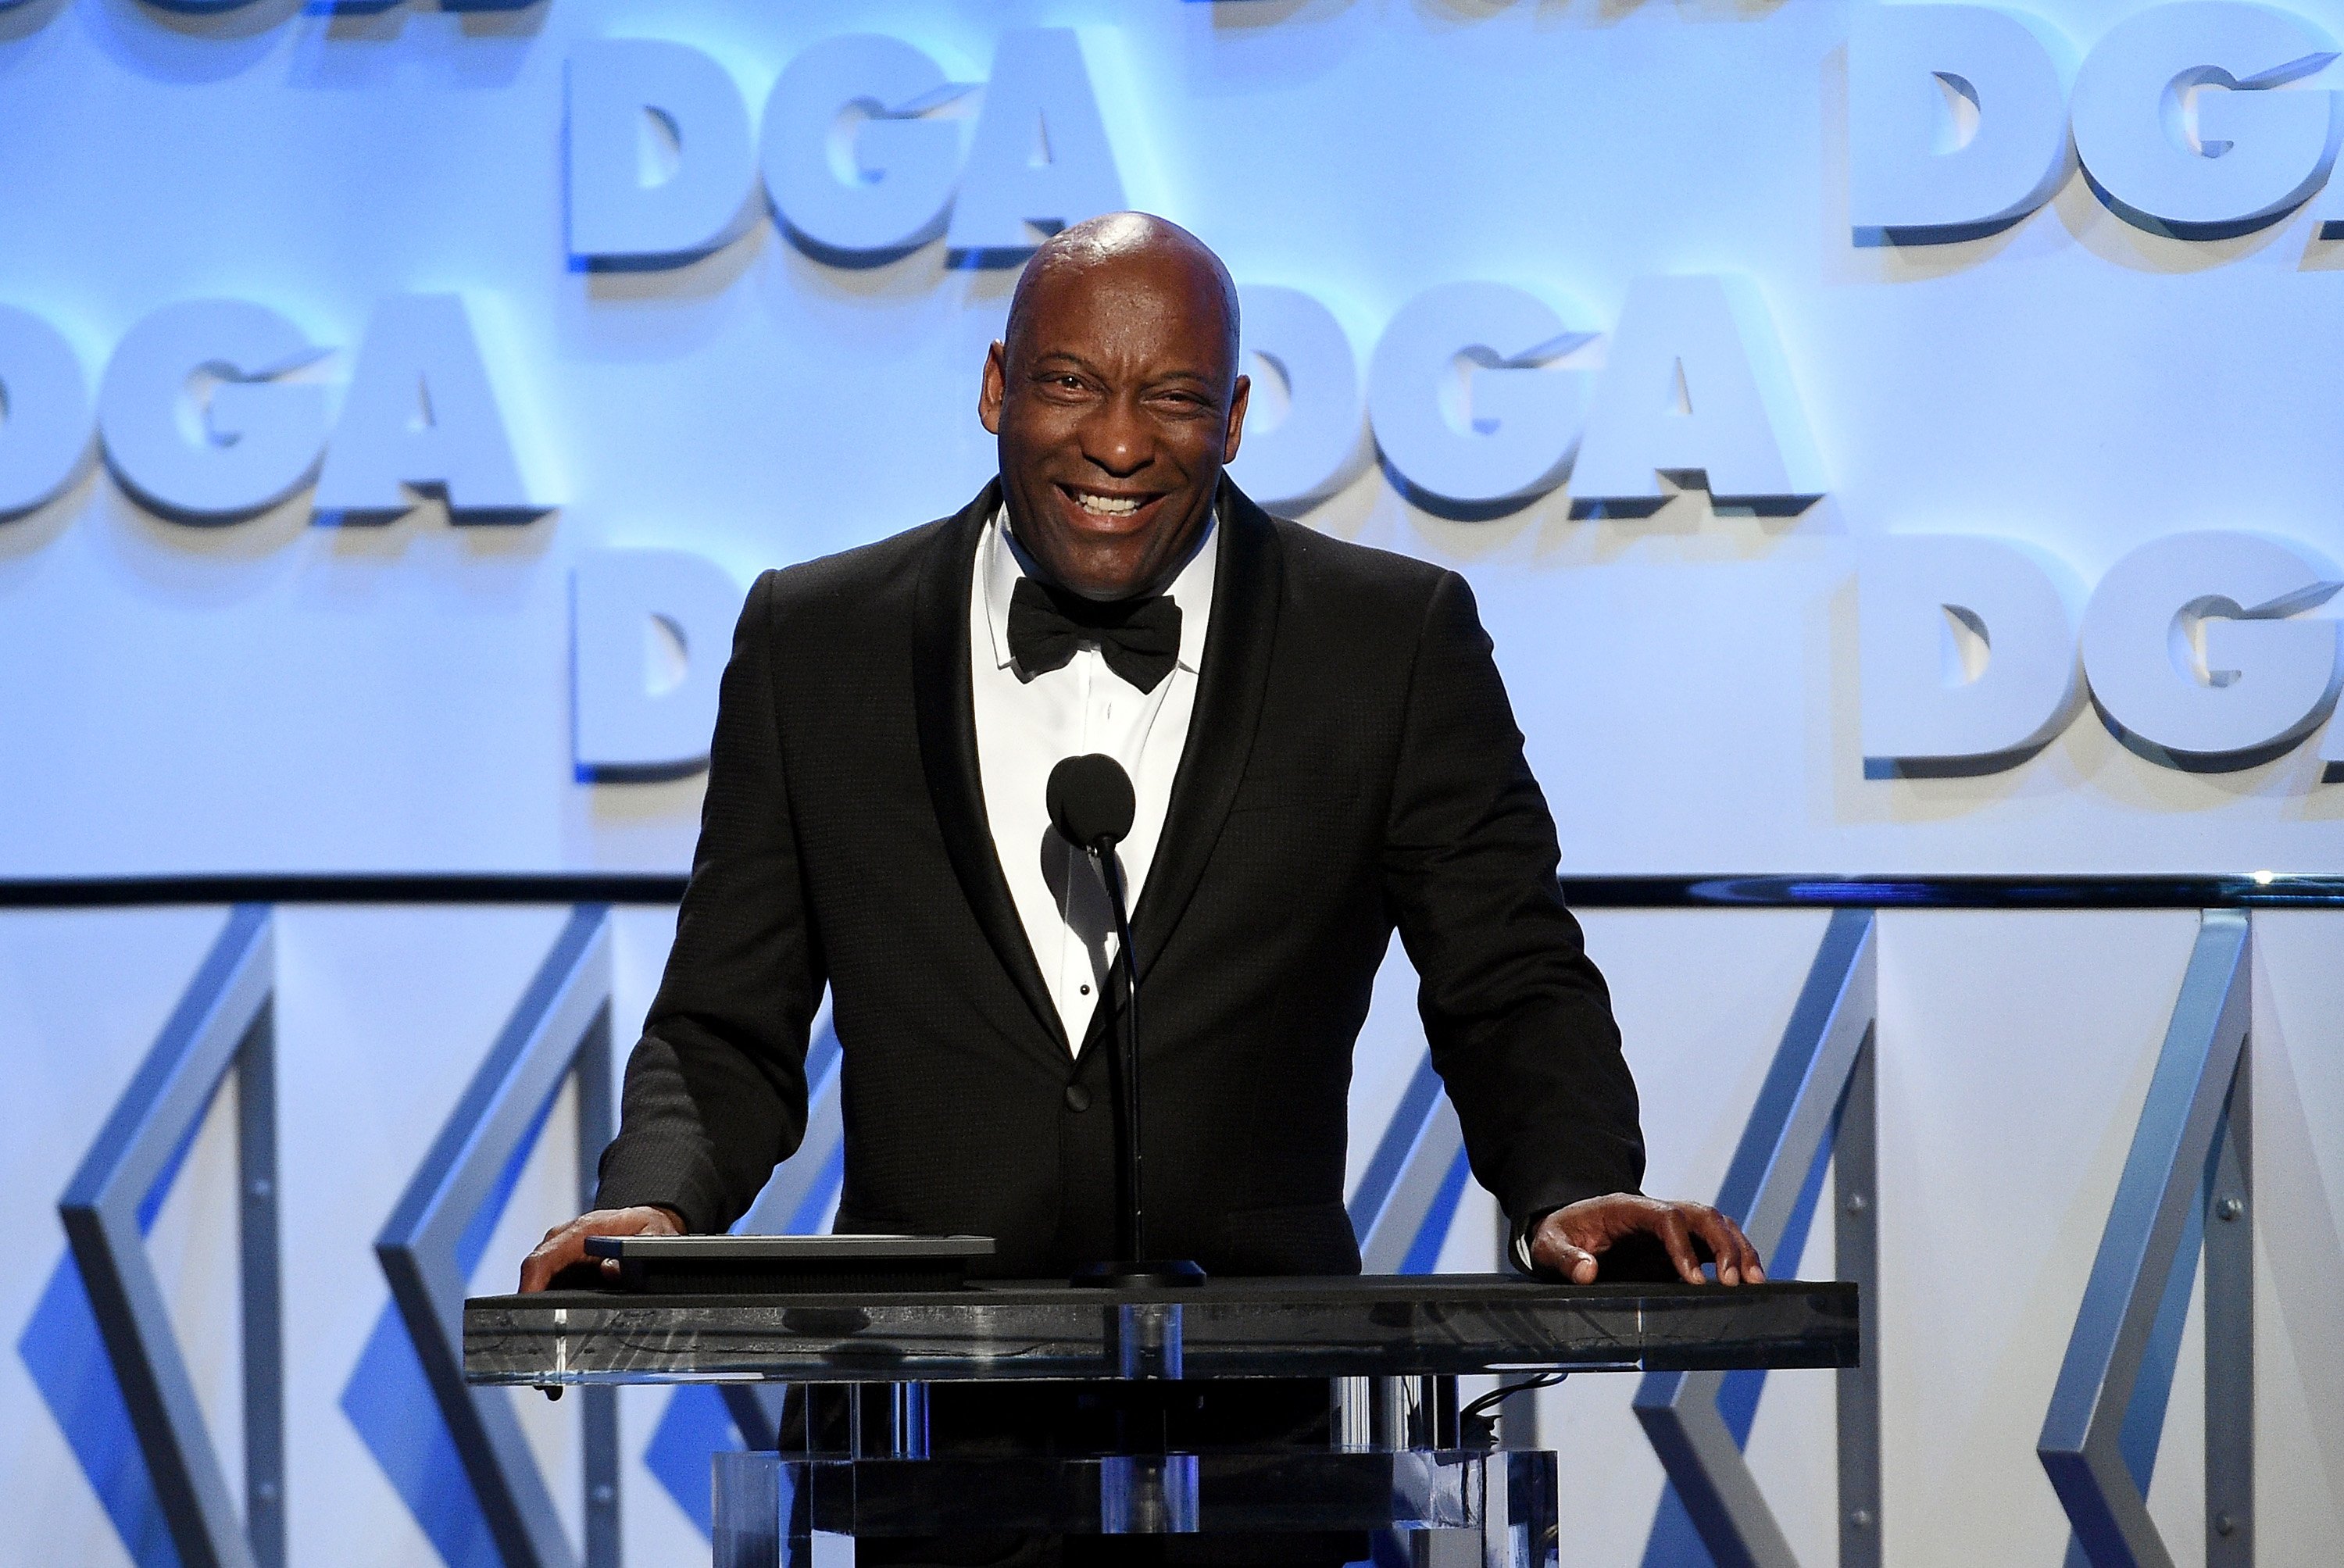 John Singleton speaking onstage during the 70th Annual Directors Guild Of America Awards in California on Feb. 3, 2018. | Photo: Getty Images